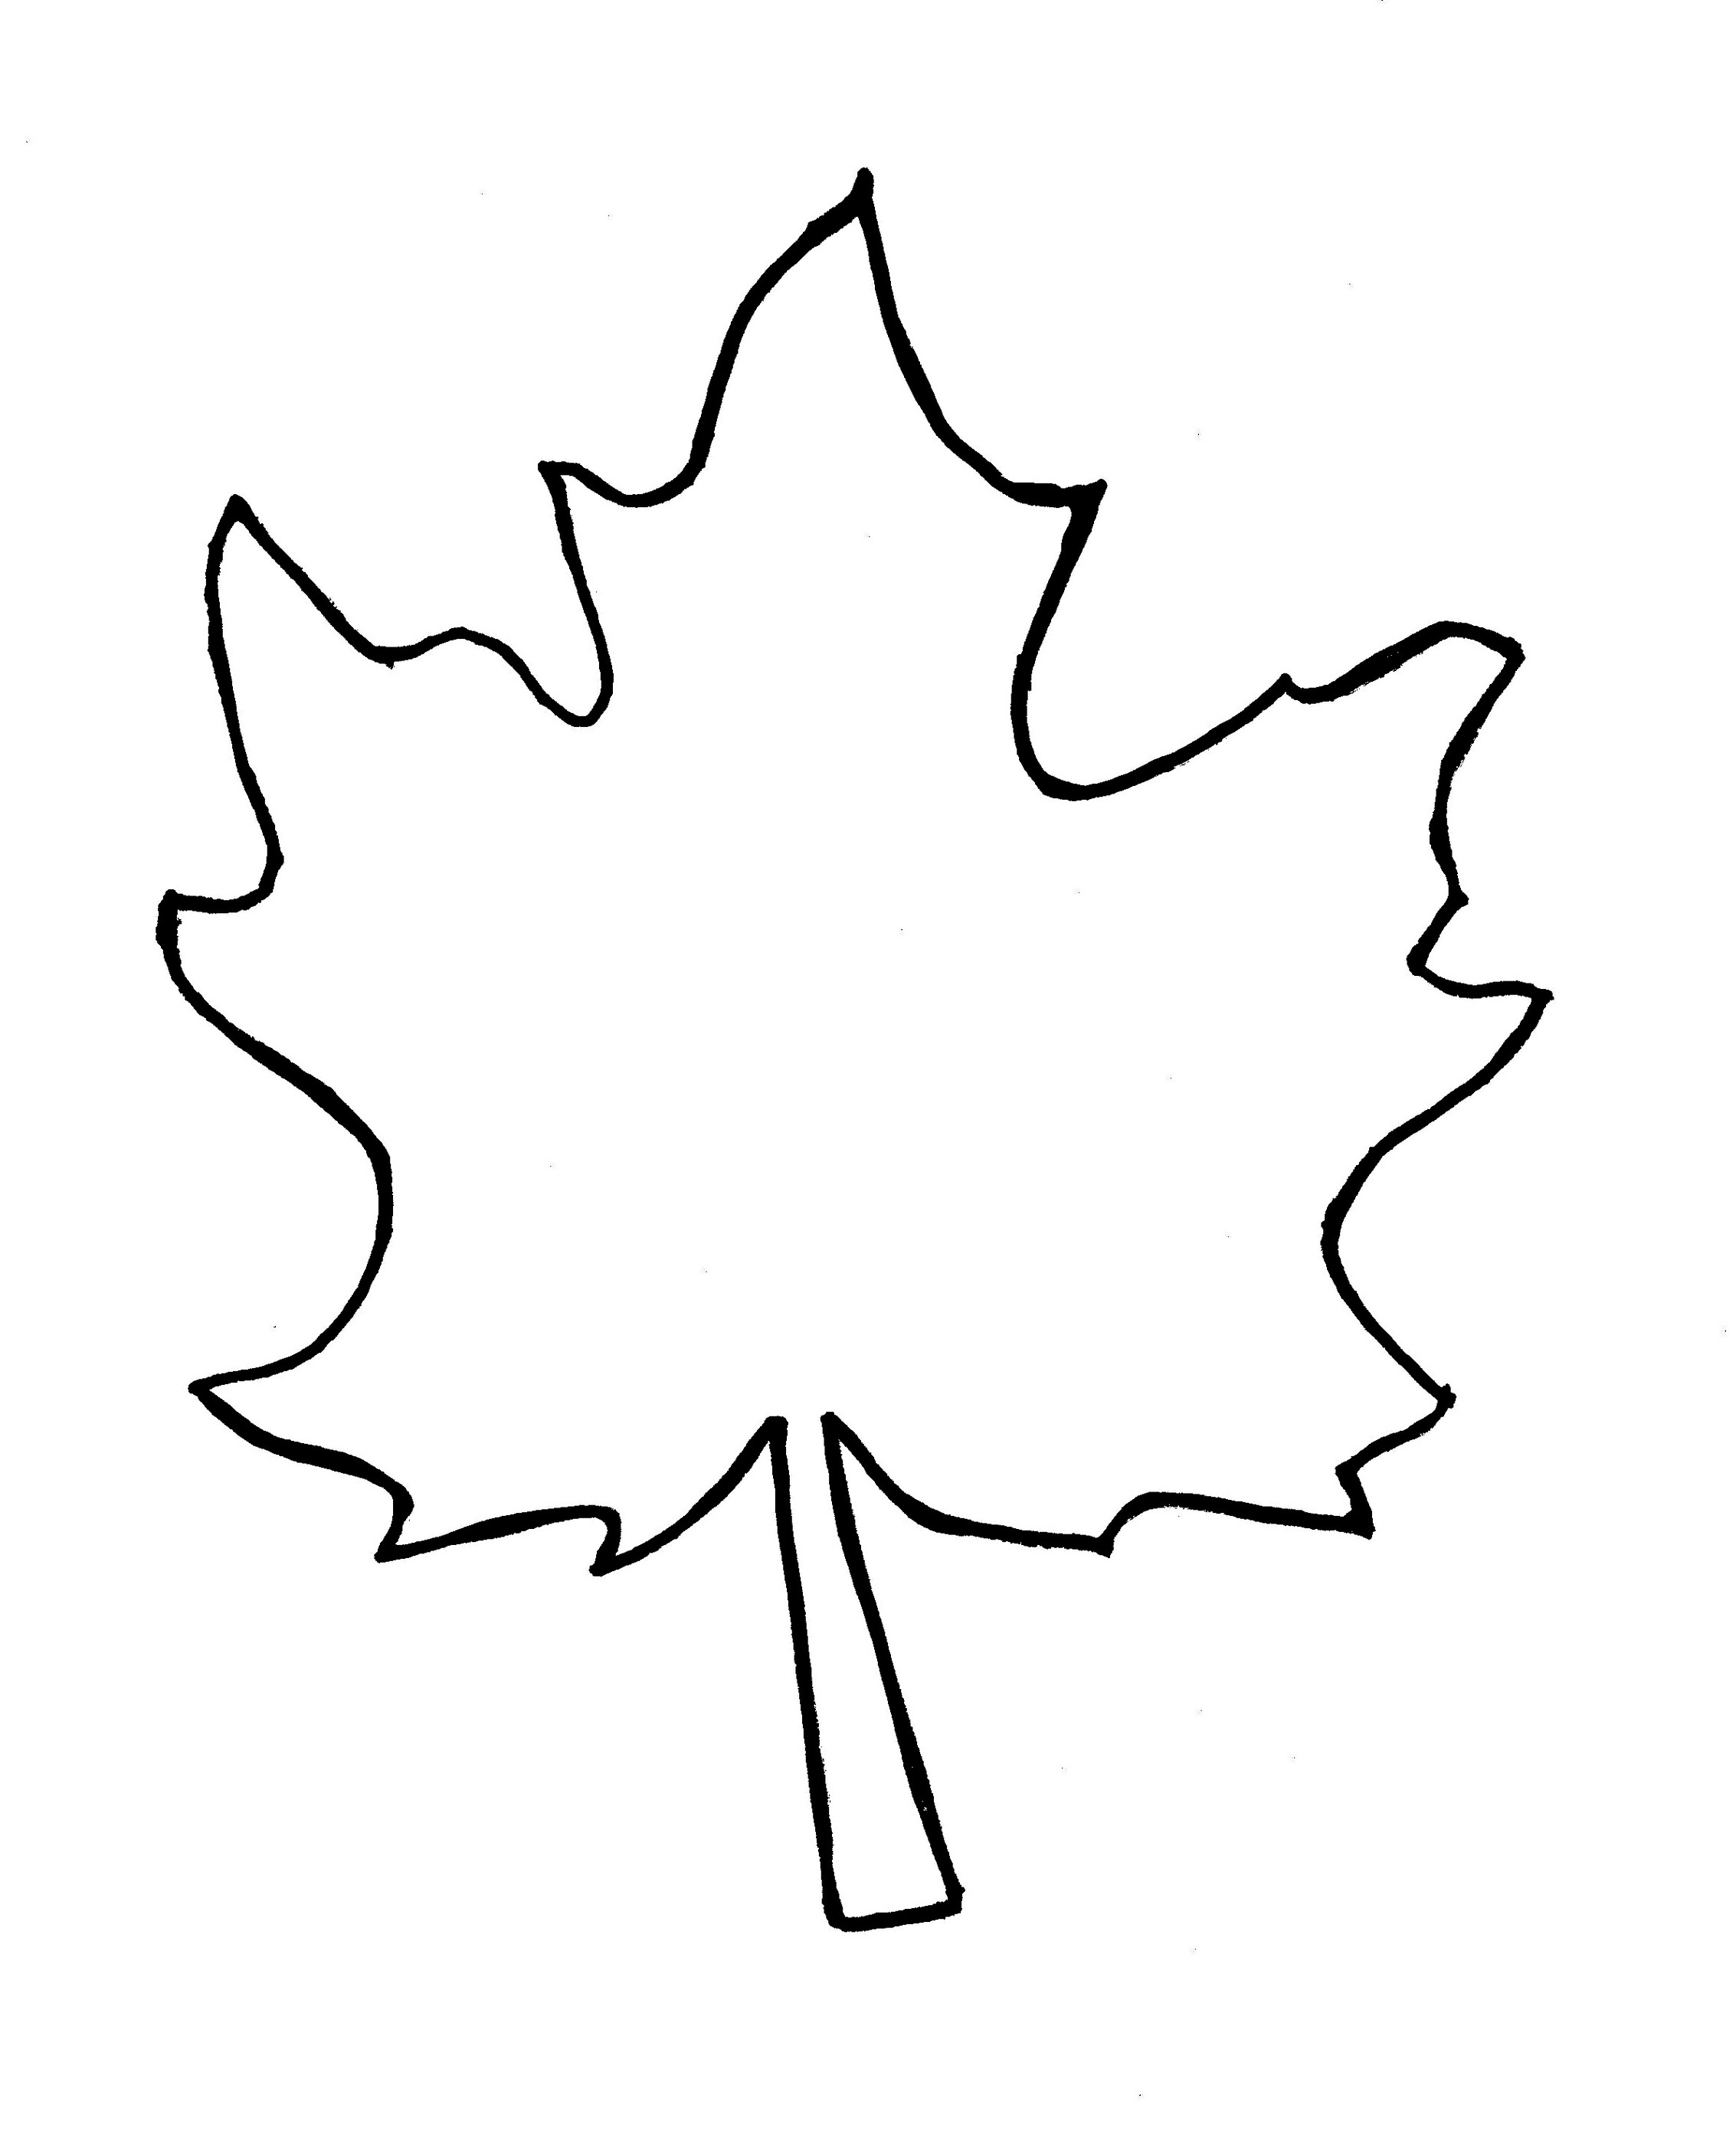 Simple leaf outline templates how to draw doodle clipart